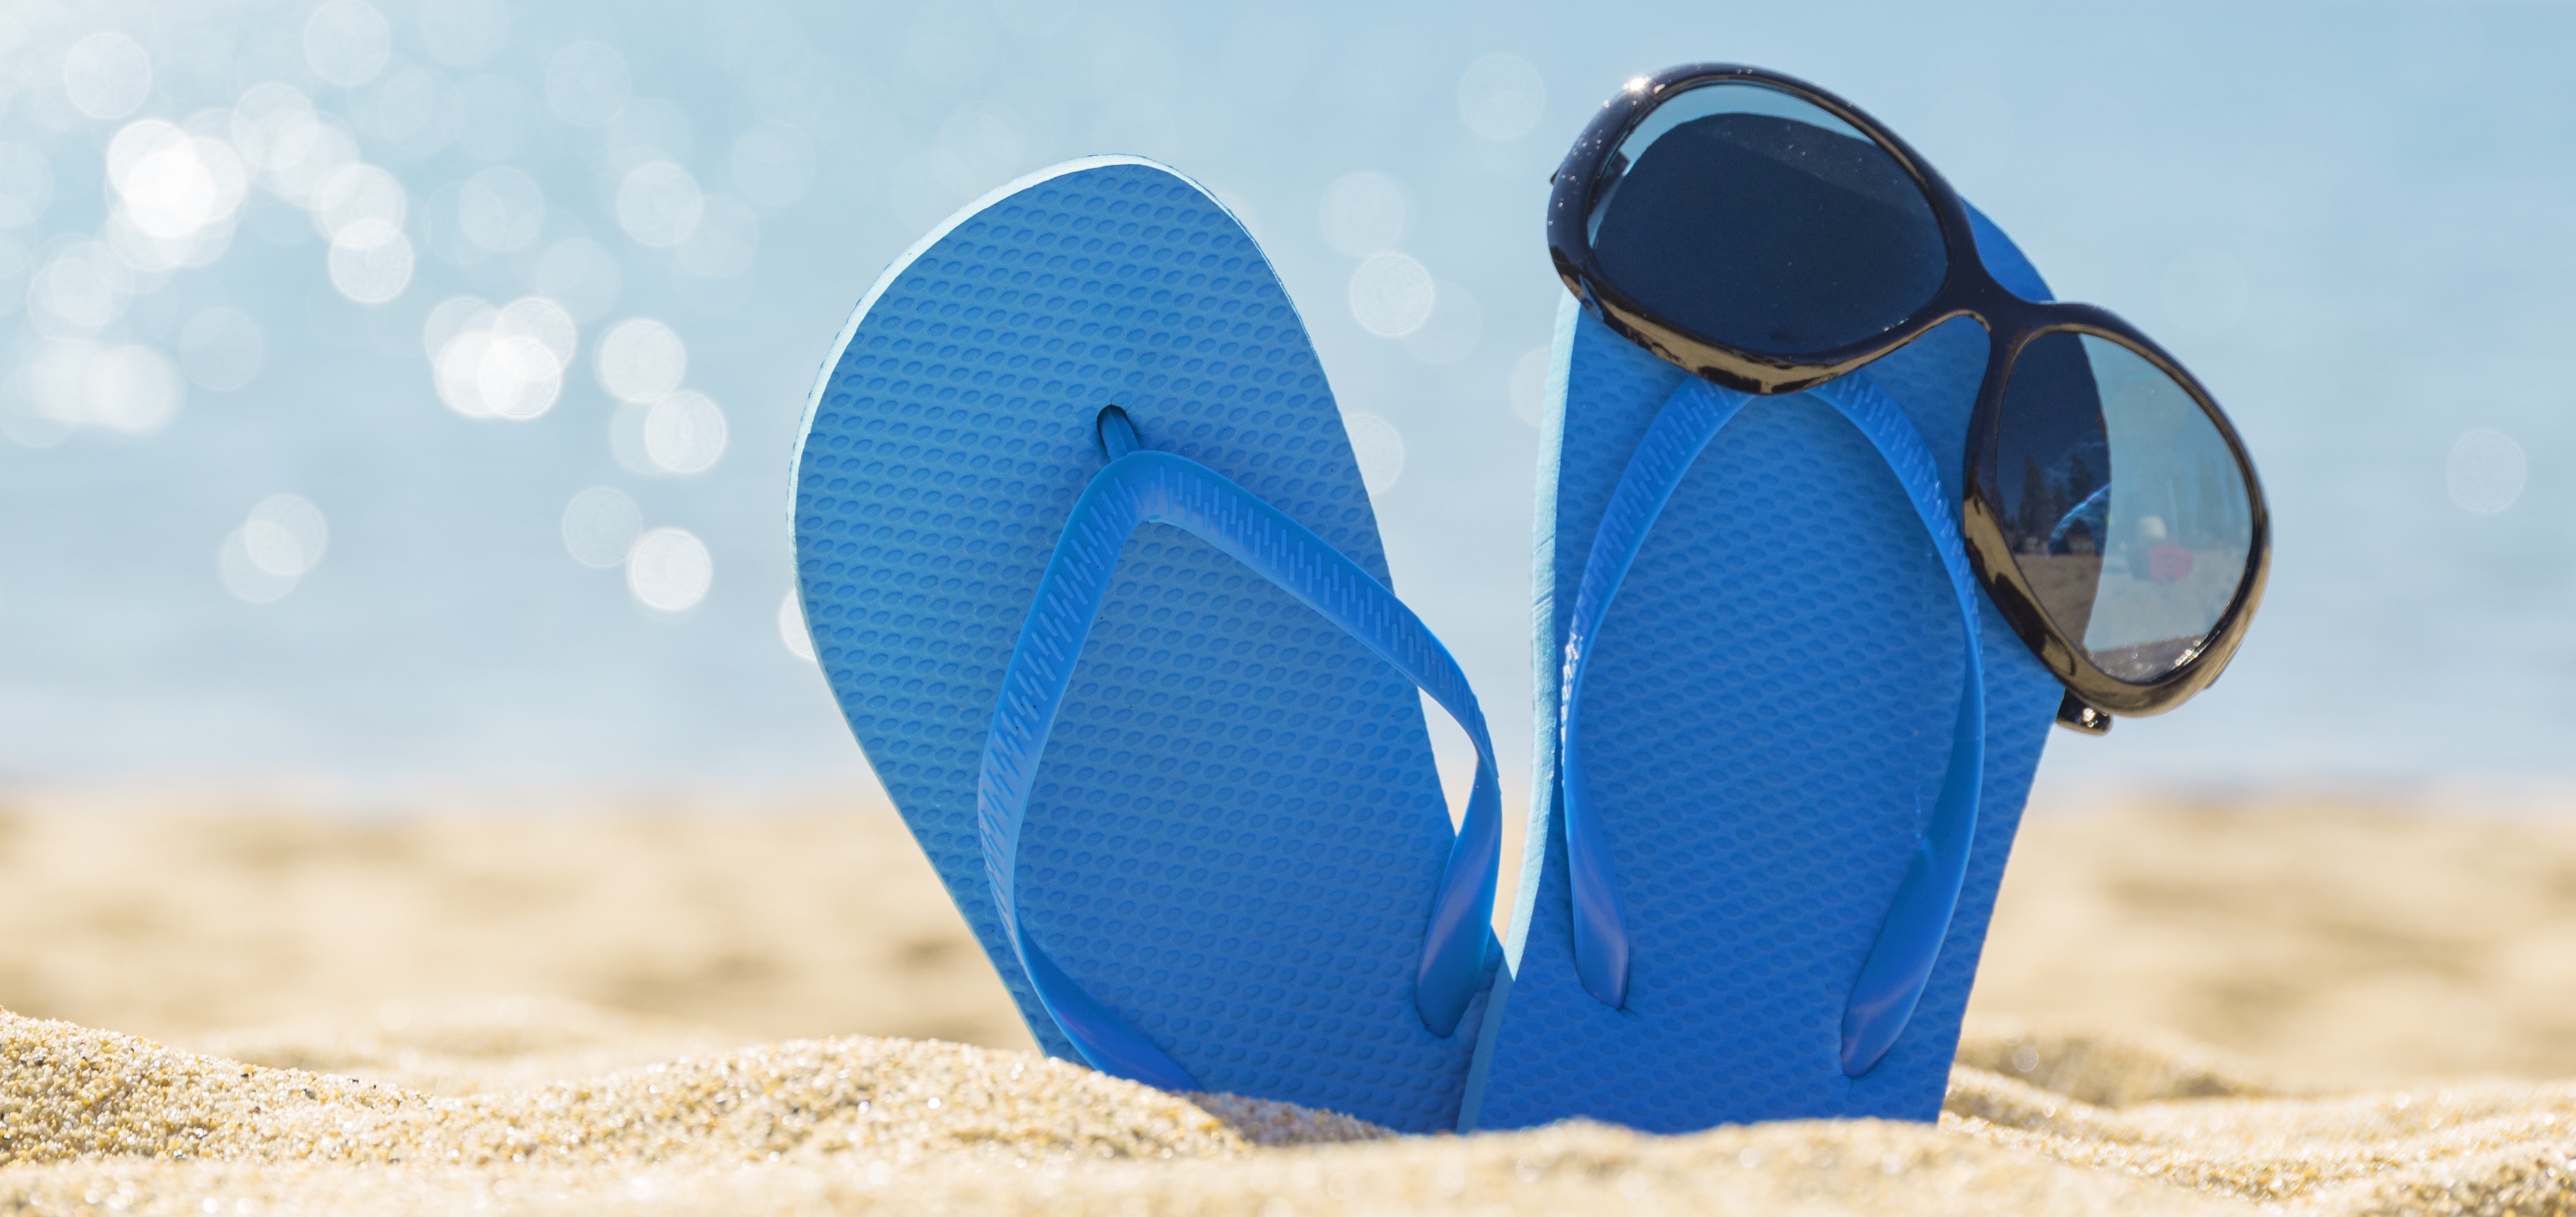 Expose your toes! It's National Flip Flop Day - North Bay News